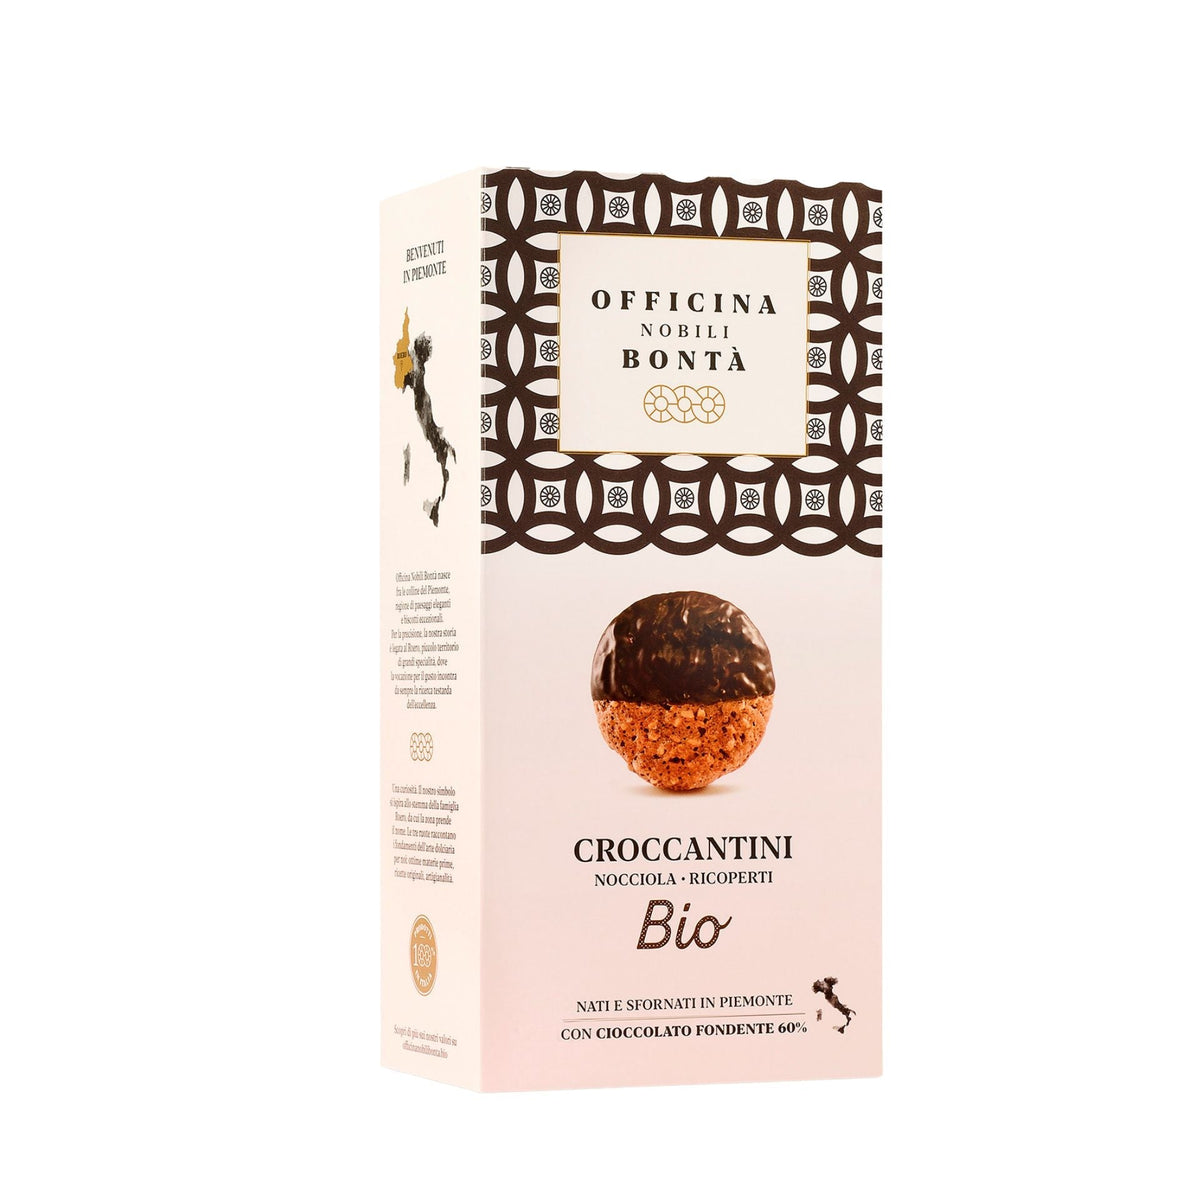 Officina Nobili Bonta Organic Chocolate Covered Hazelnut Croccantini Biscuit 170g (Box)  | Imported and distributed in the UK by Just Gourmet Foods